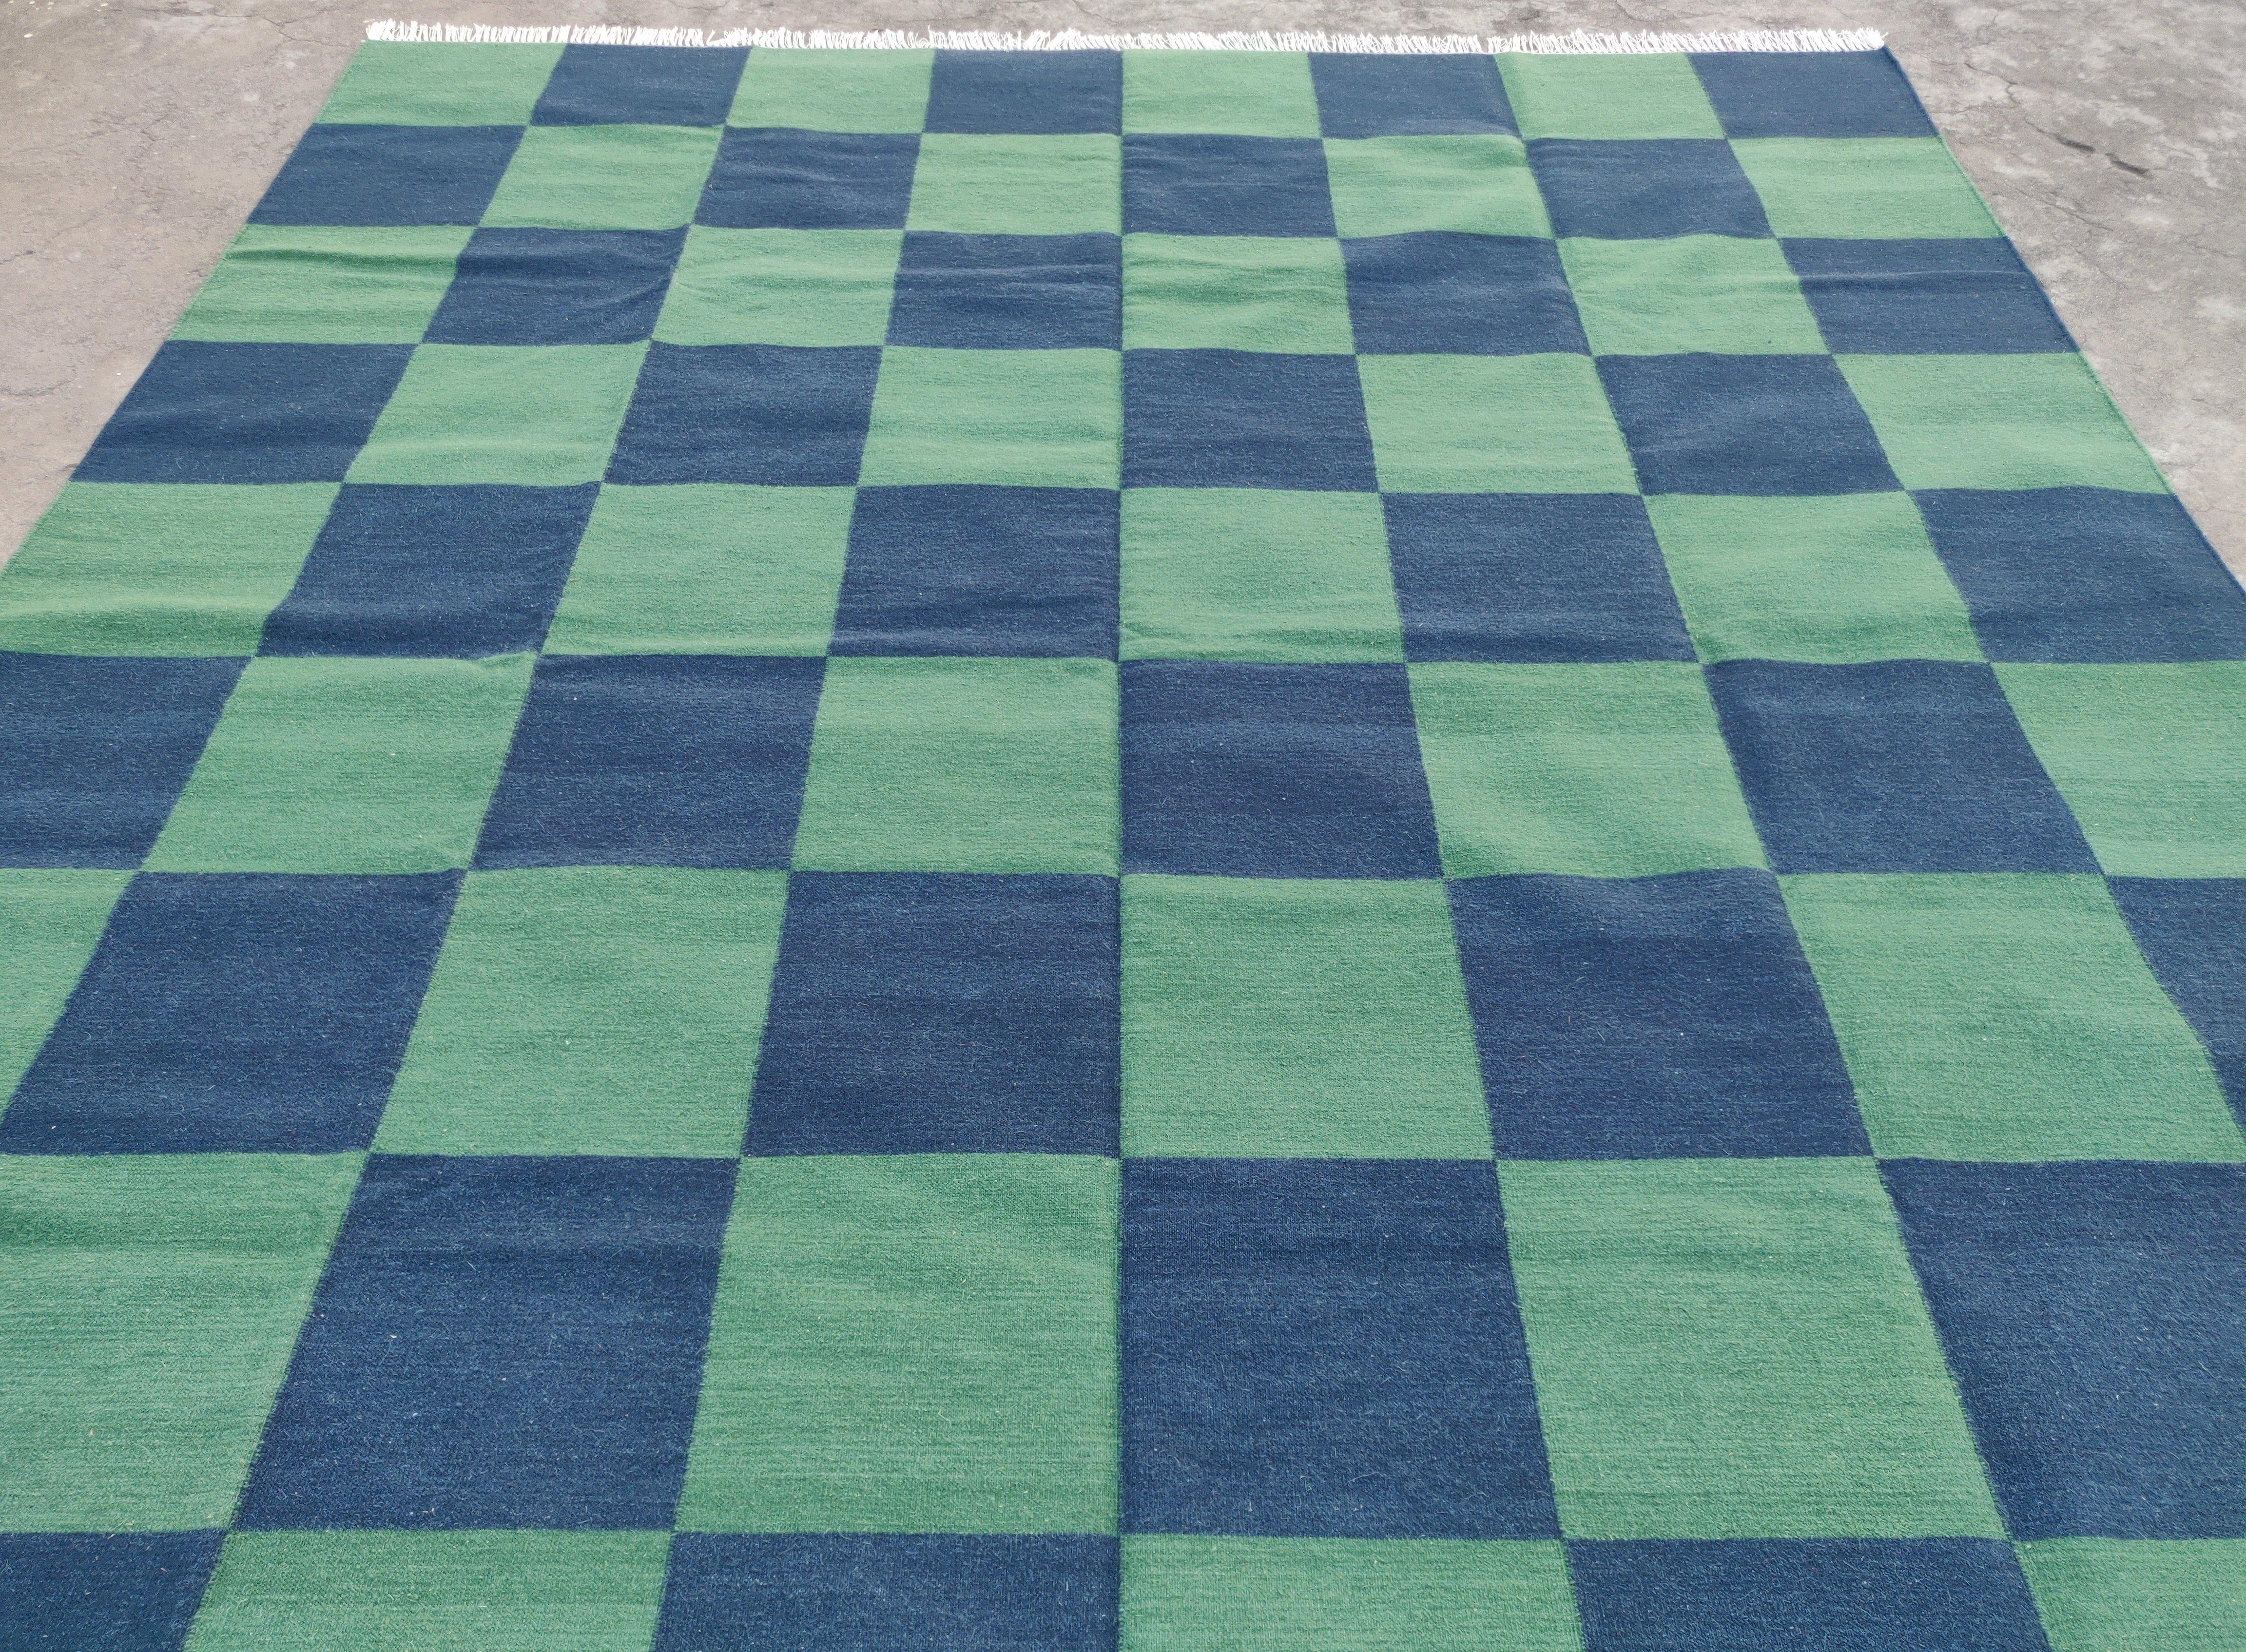 Handmade Woolen Area Flat Weave Rug, 6x9 Blue And Green Tile Checked Dhurrie Rug For Sale 2